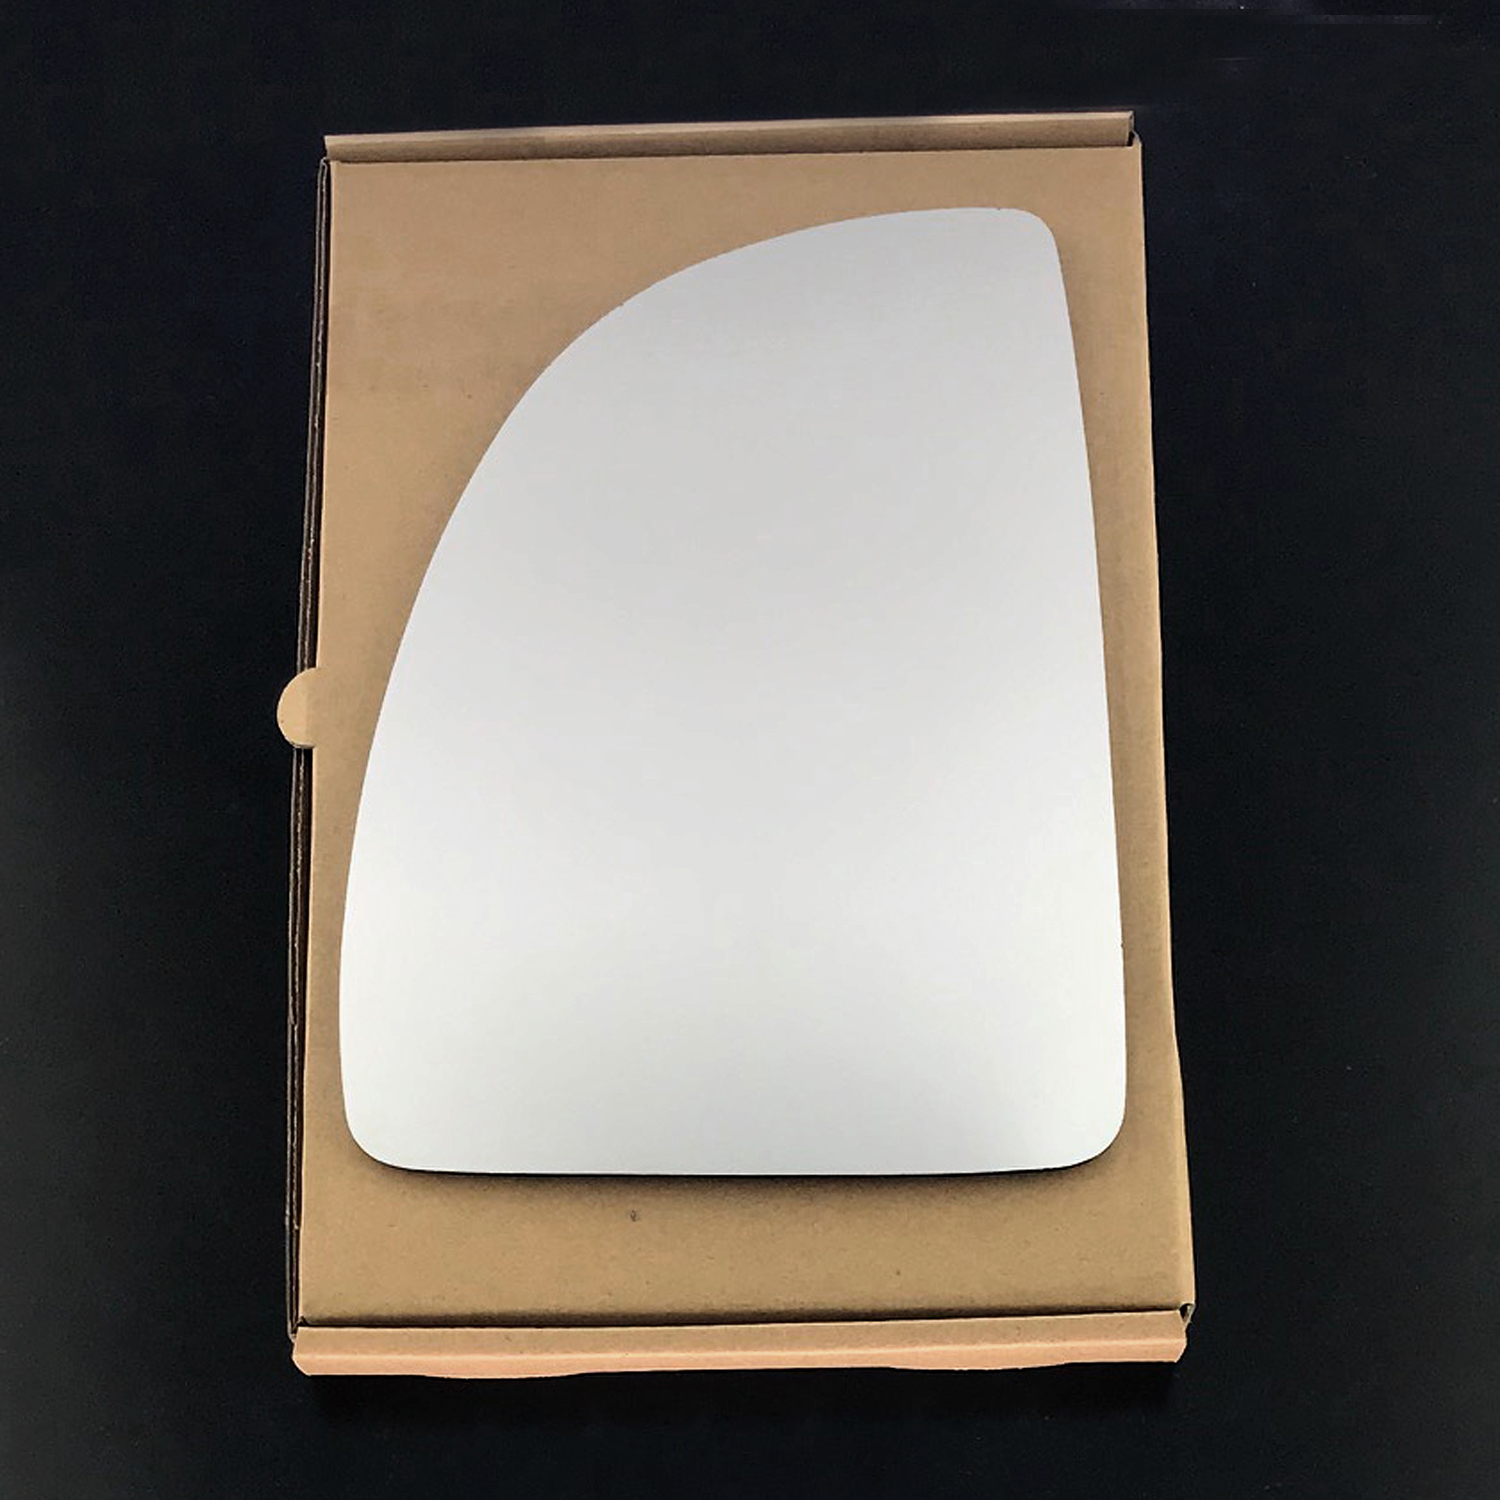 FIAT Ducato Wing Mirror Glass LEFT HAND ( UK Passenger Side ) 2001 to 2006 – Convex Wing Mirror